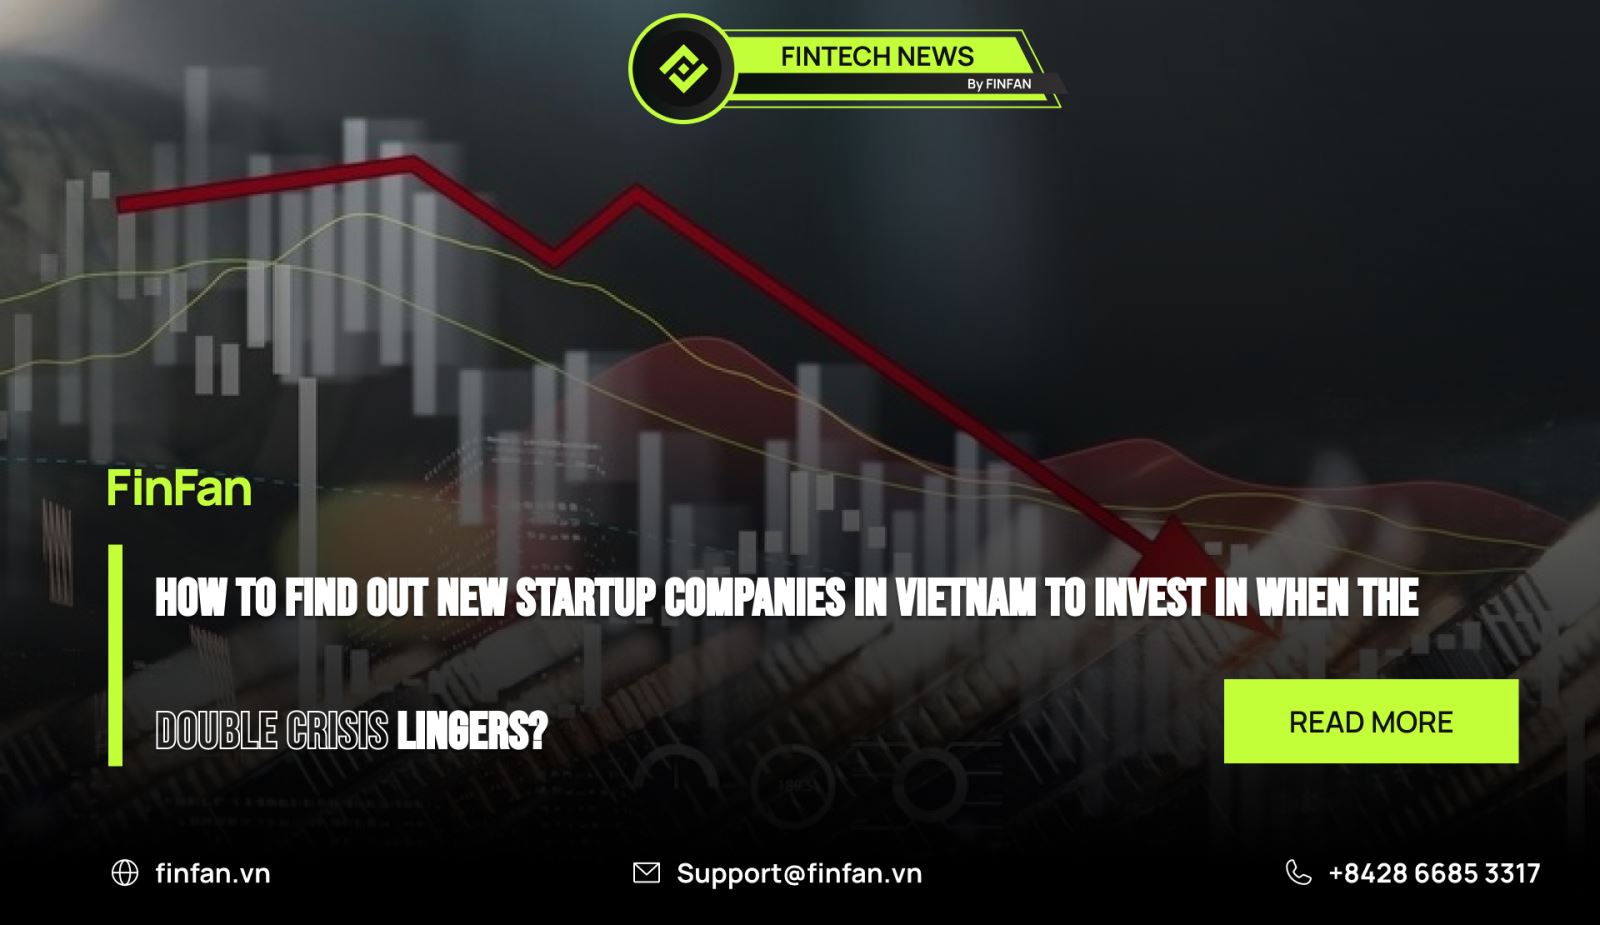 How to find out new startup companies in Vietnam to invest in when the double crisis lingers?